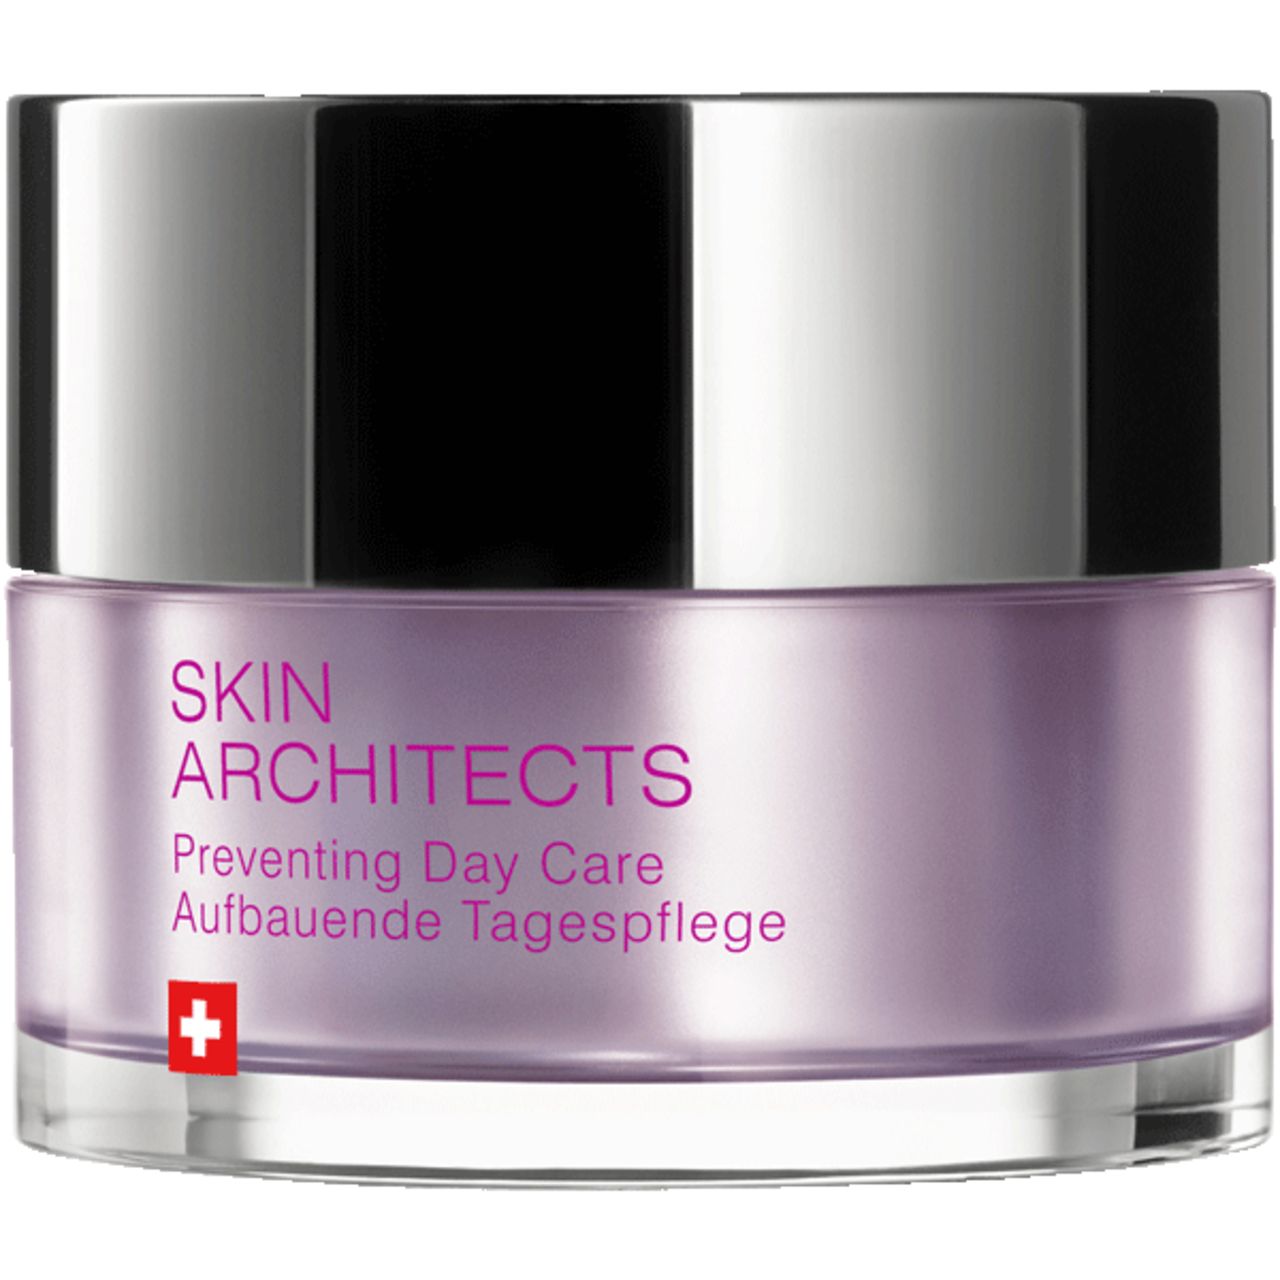 Artemis of Switzerland Skin Architects Preventing Day Care